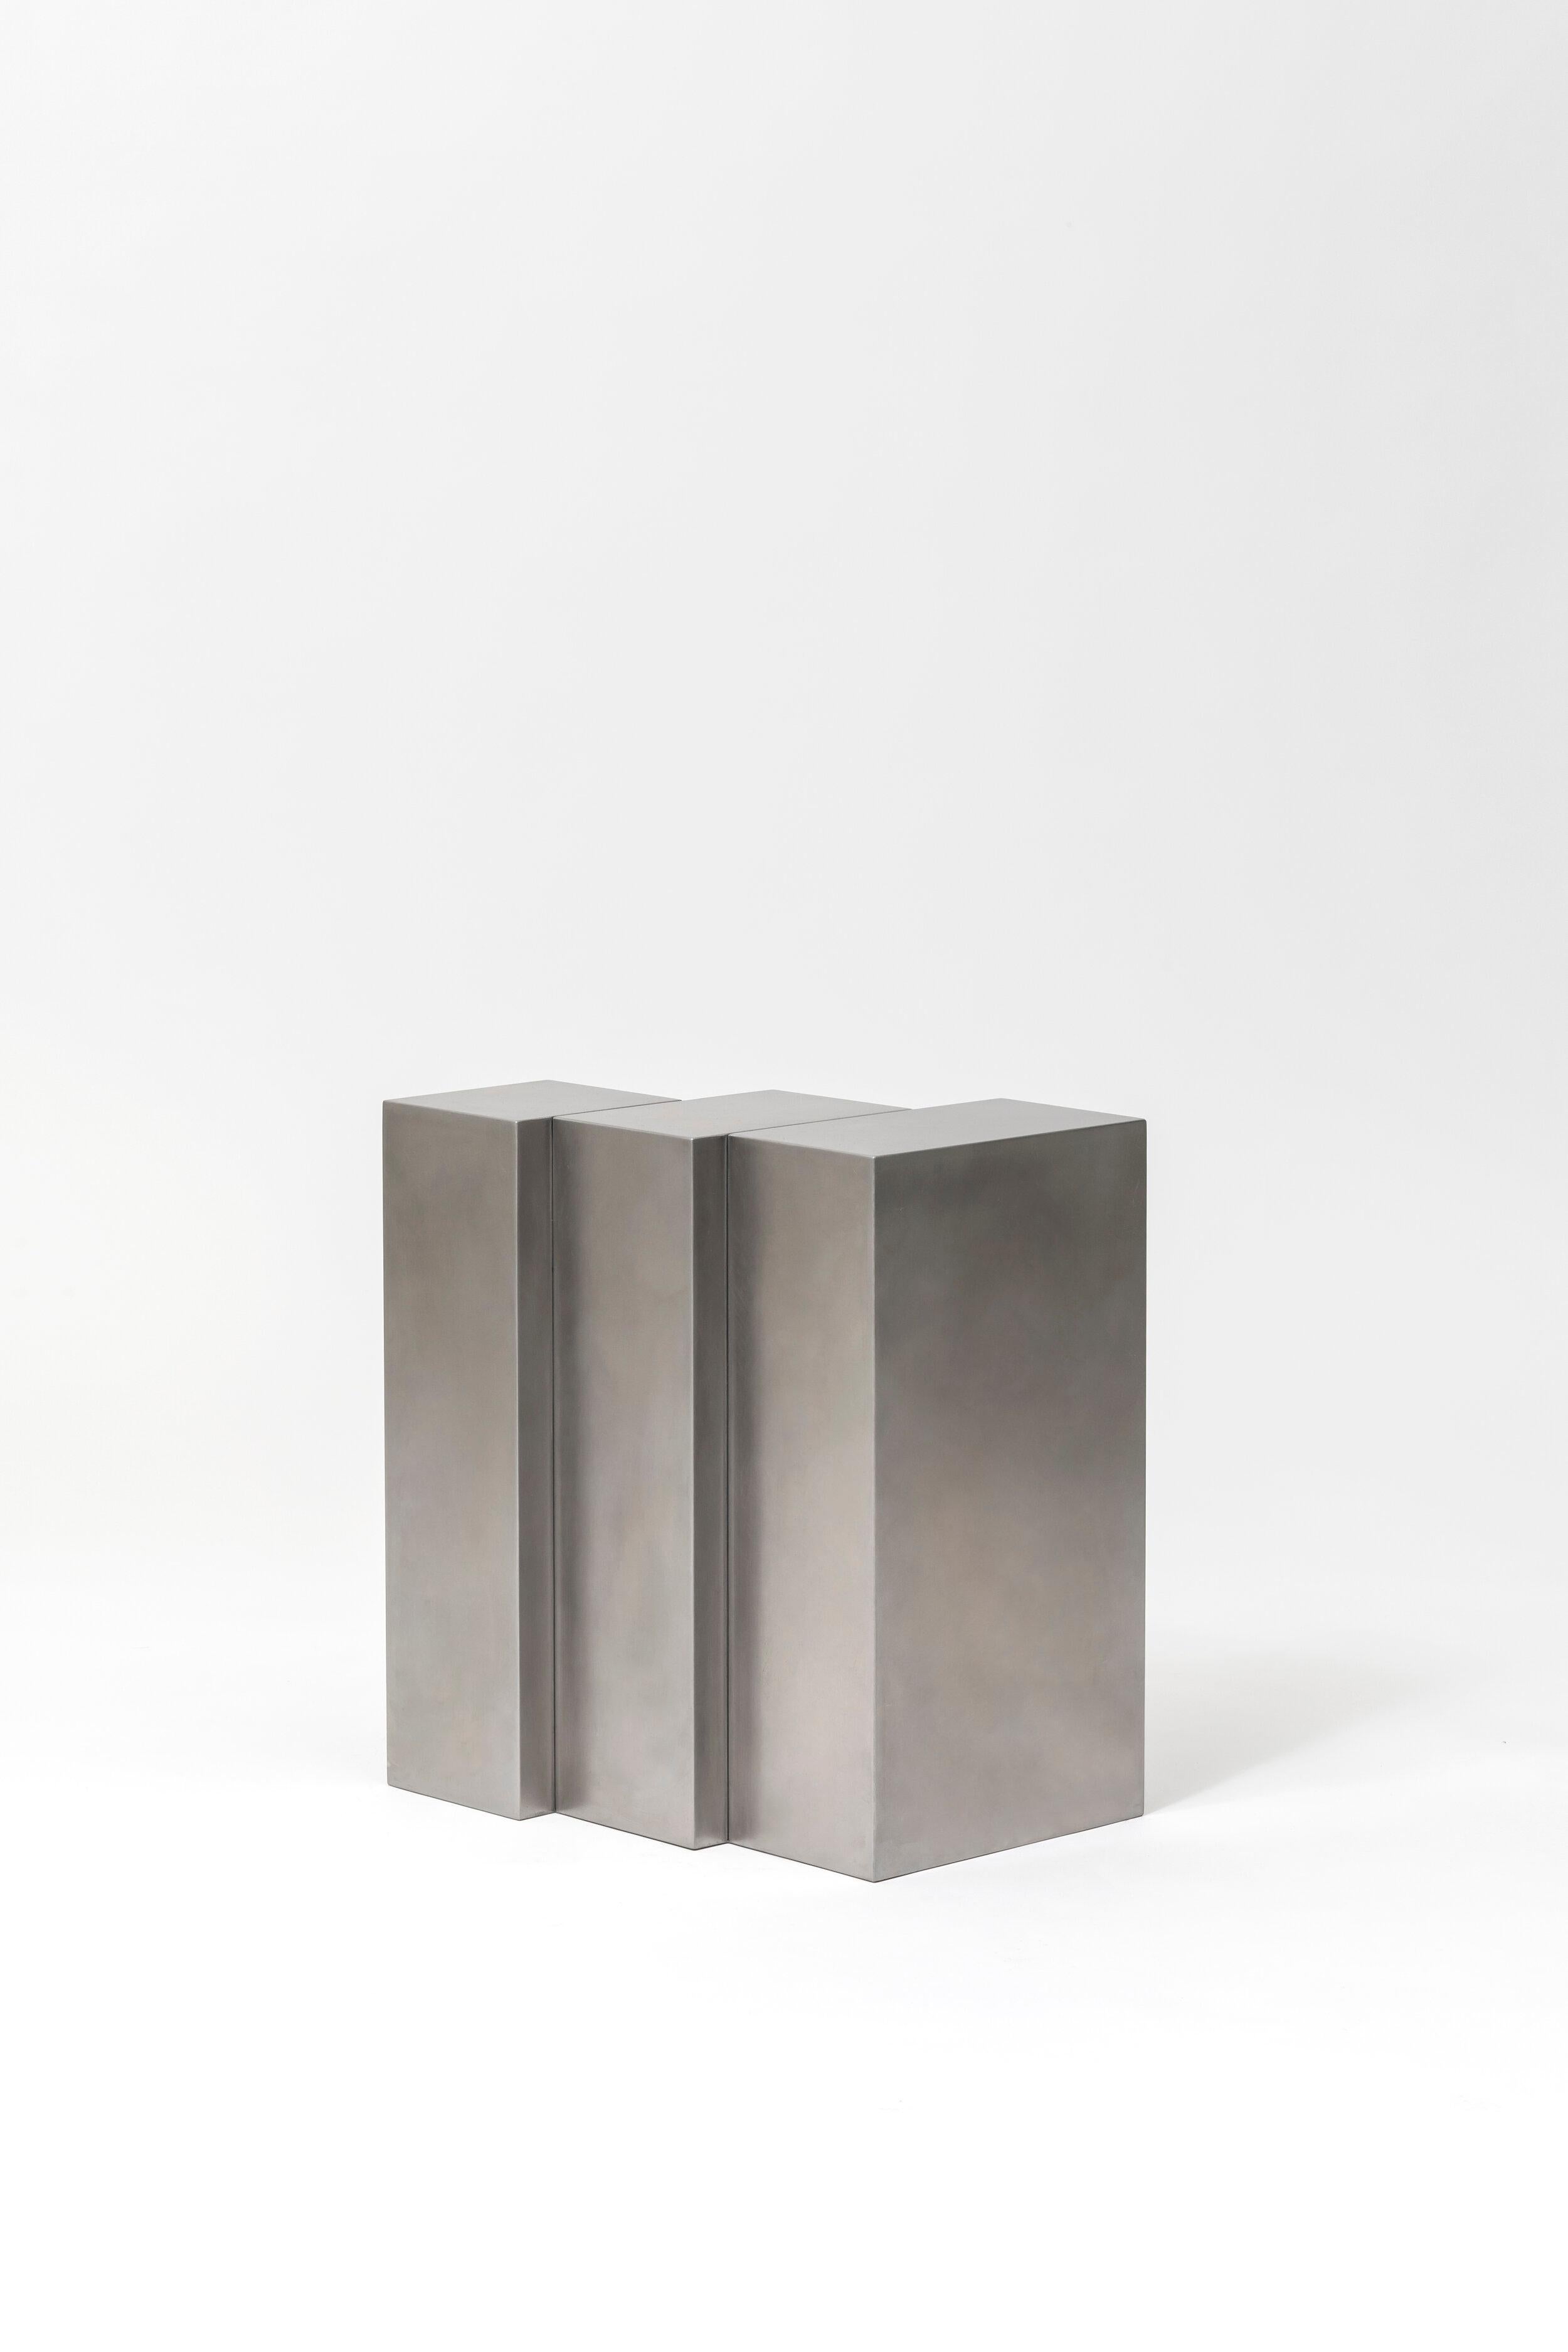 Post-Modern Layered Steel Seat XIV by Hyungshin Hwang For Sale